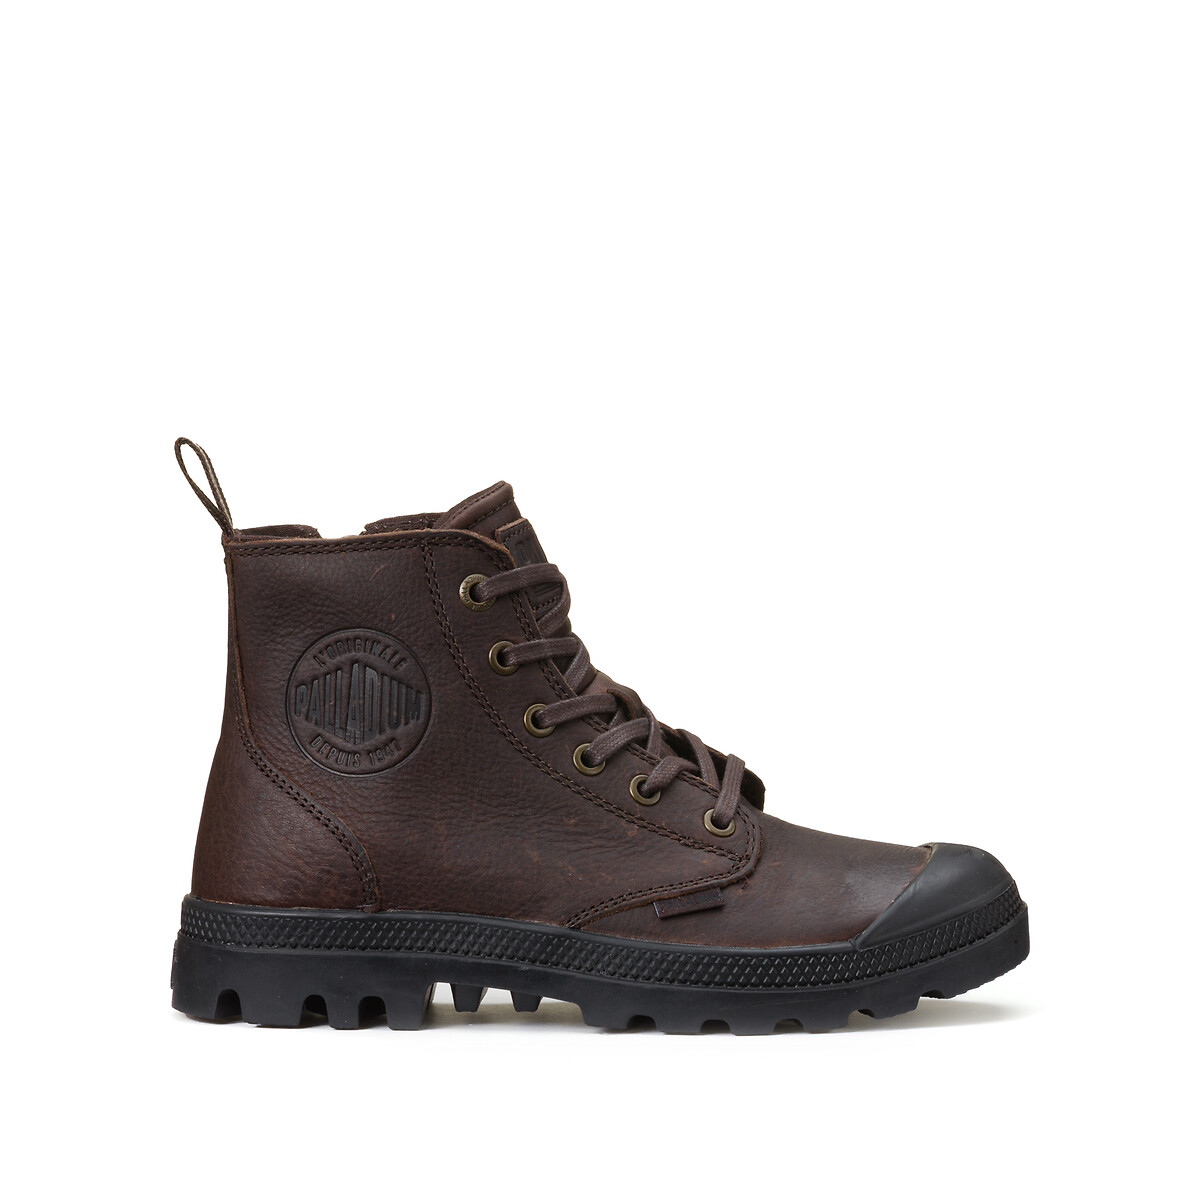 Pampa Hi Zip Walking Boots in Leather